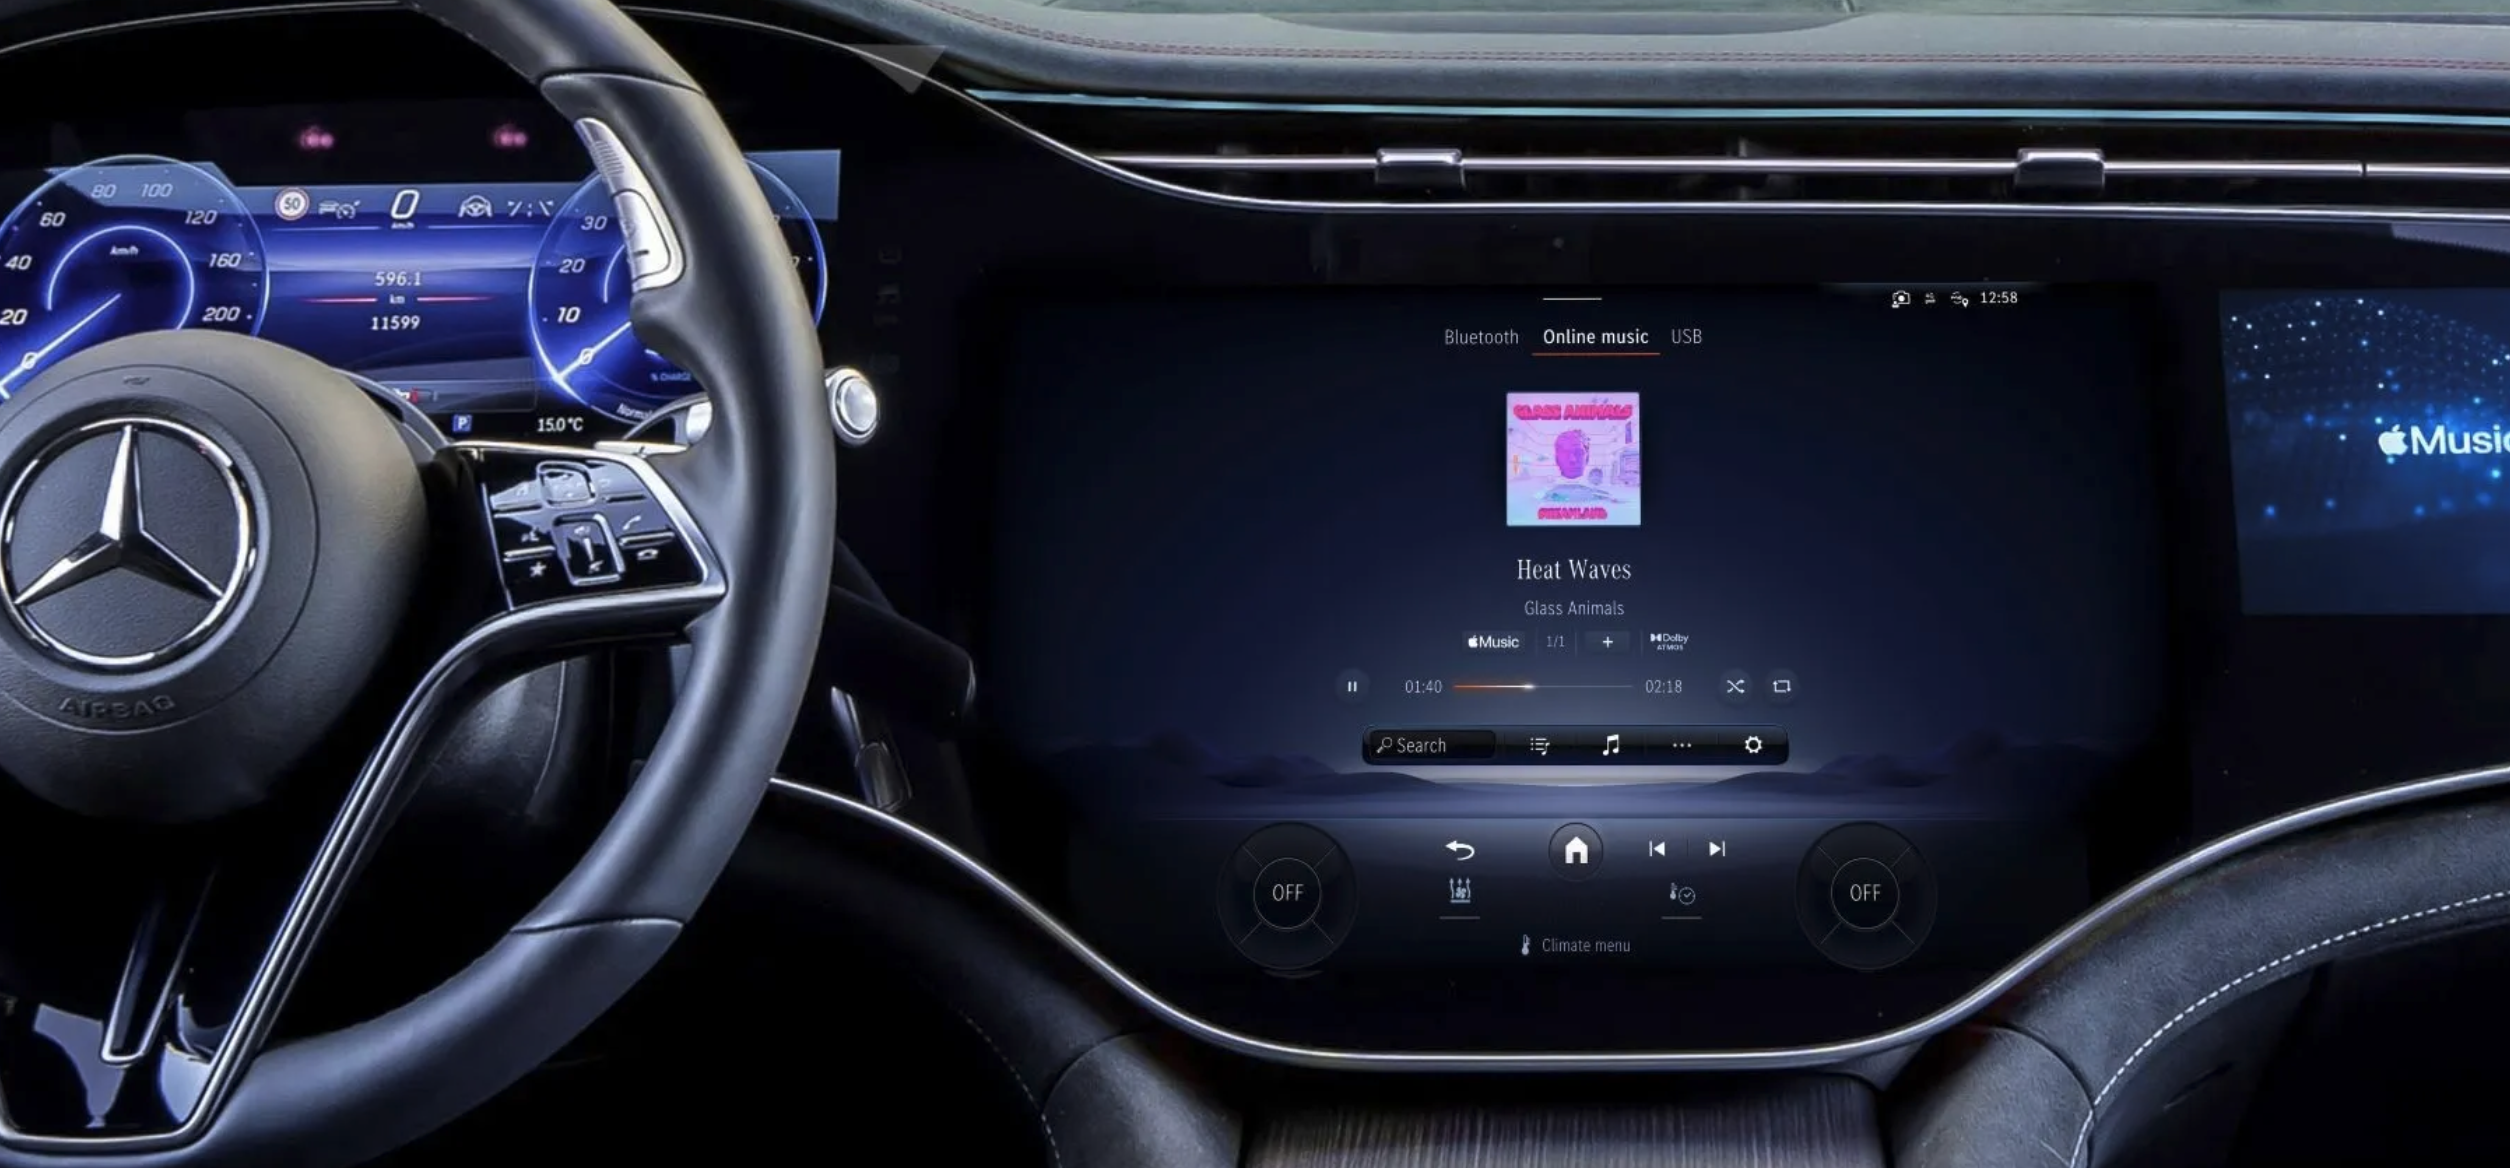 Three-dimensional Apple audio will arrive on Mercedes-Benz